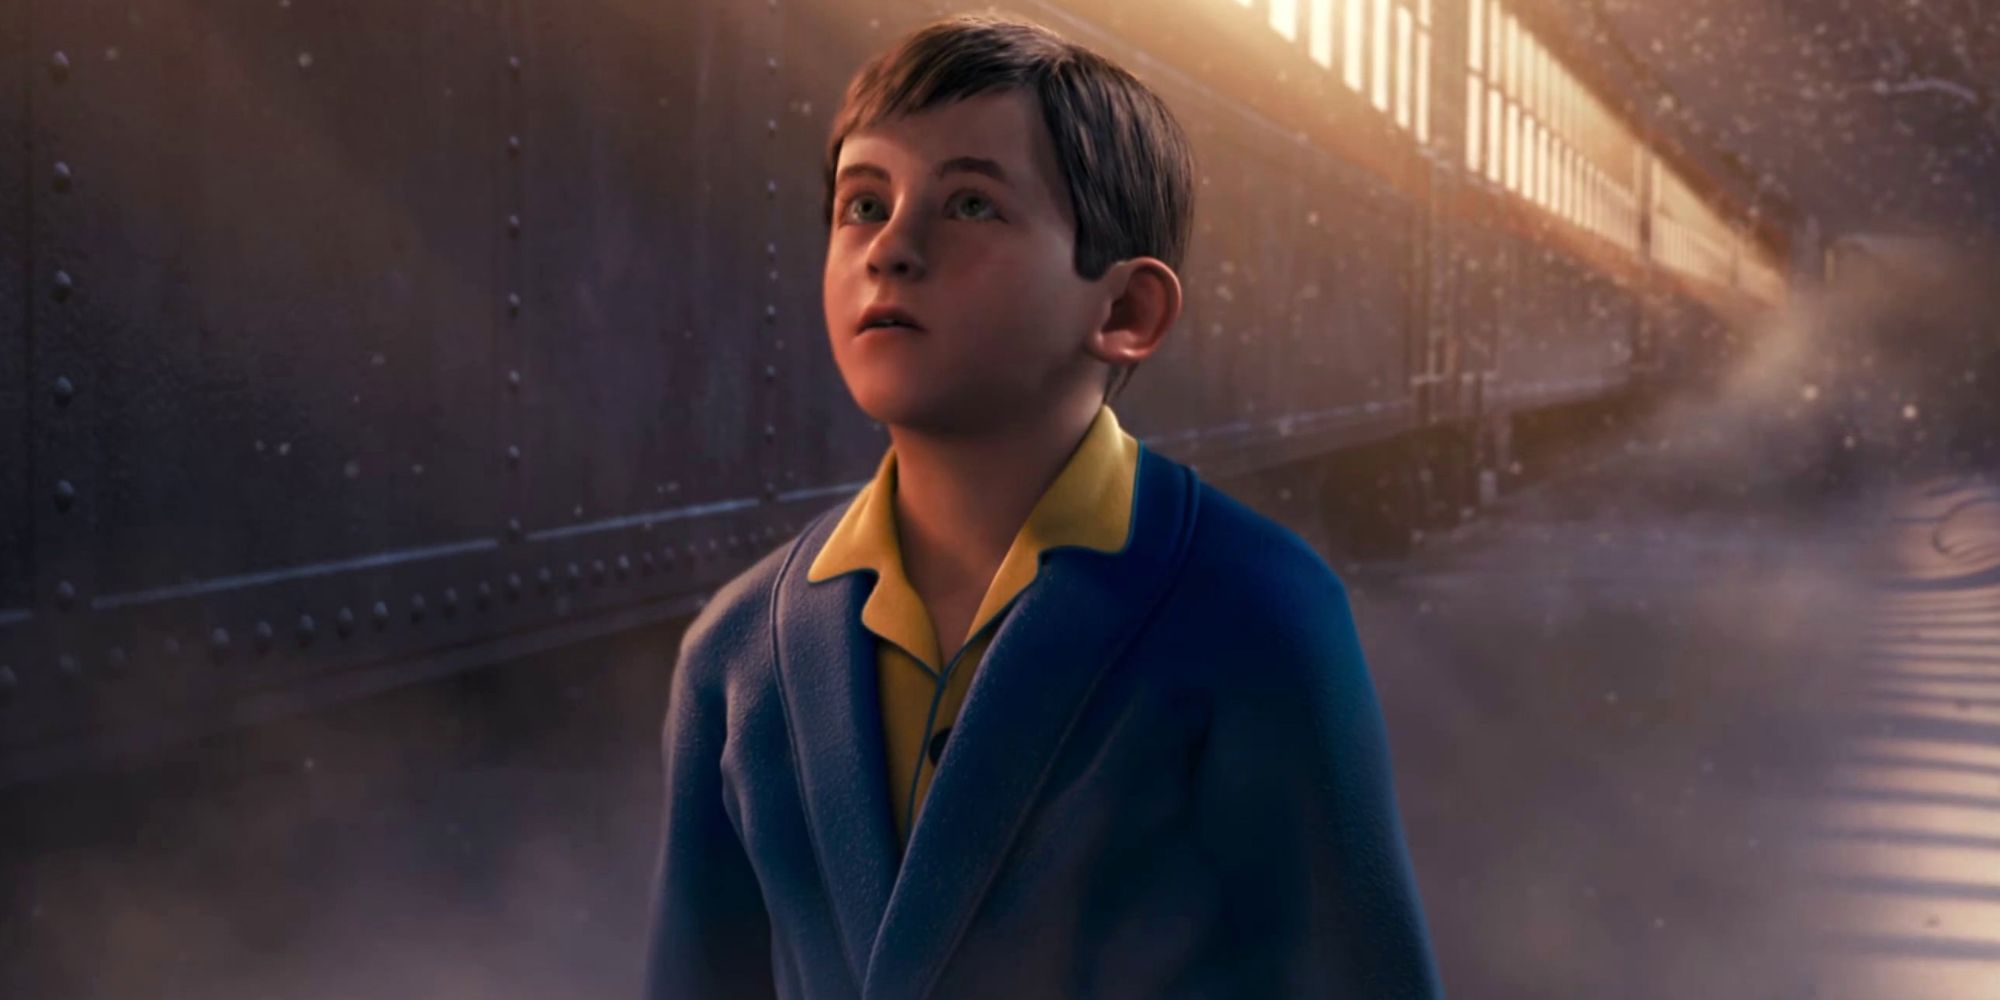 A boy looking at a train in the snow in 'The Polar Express'